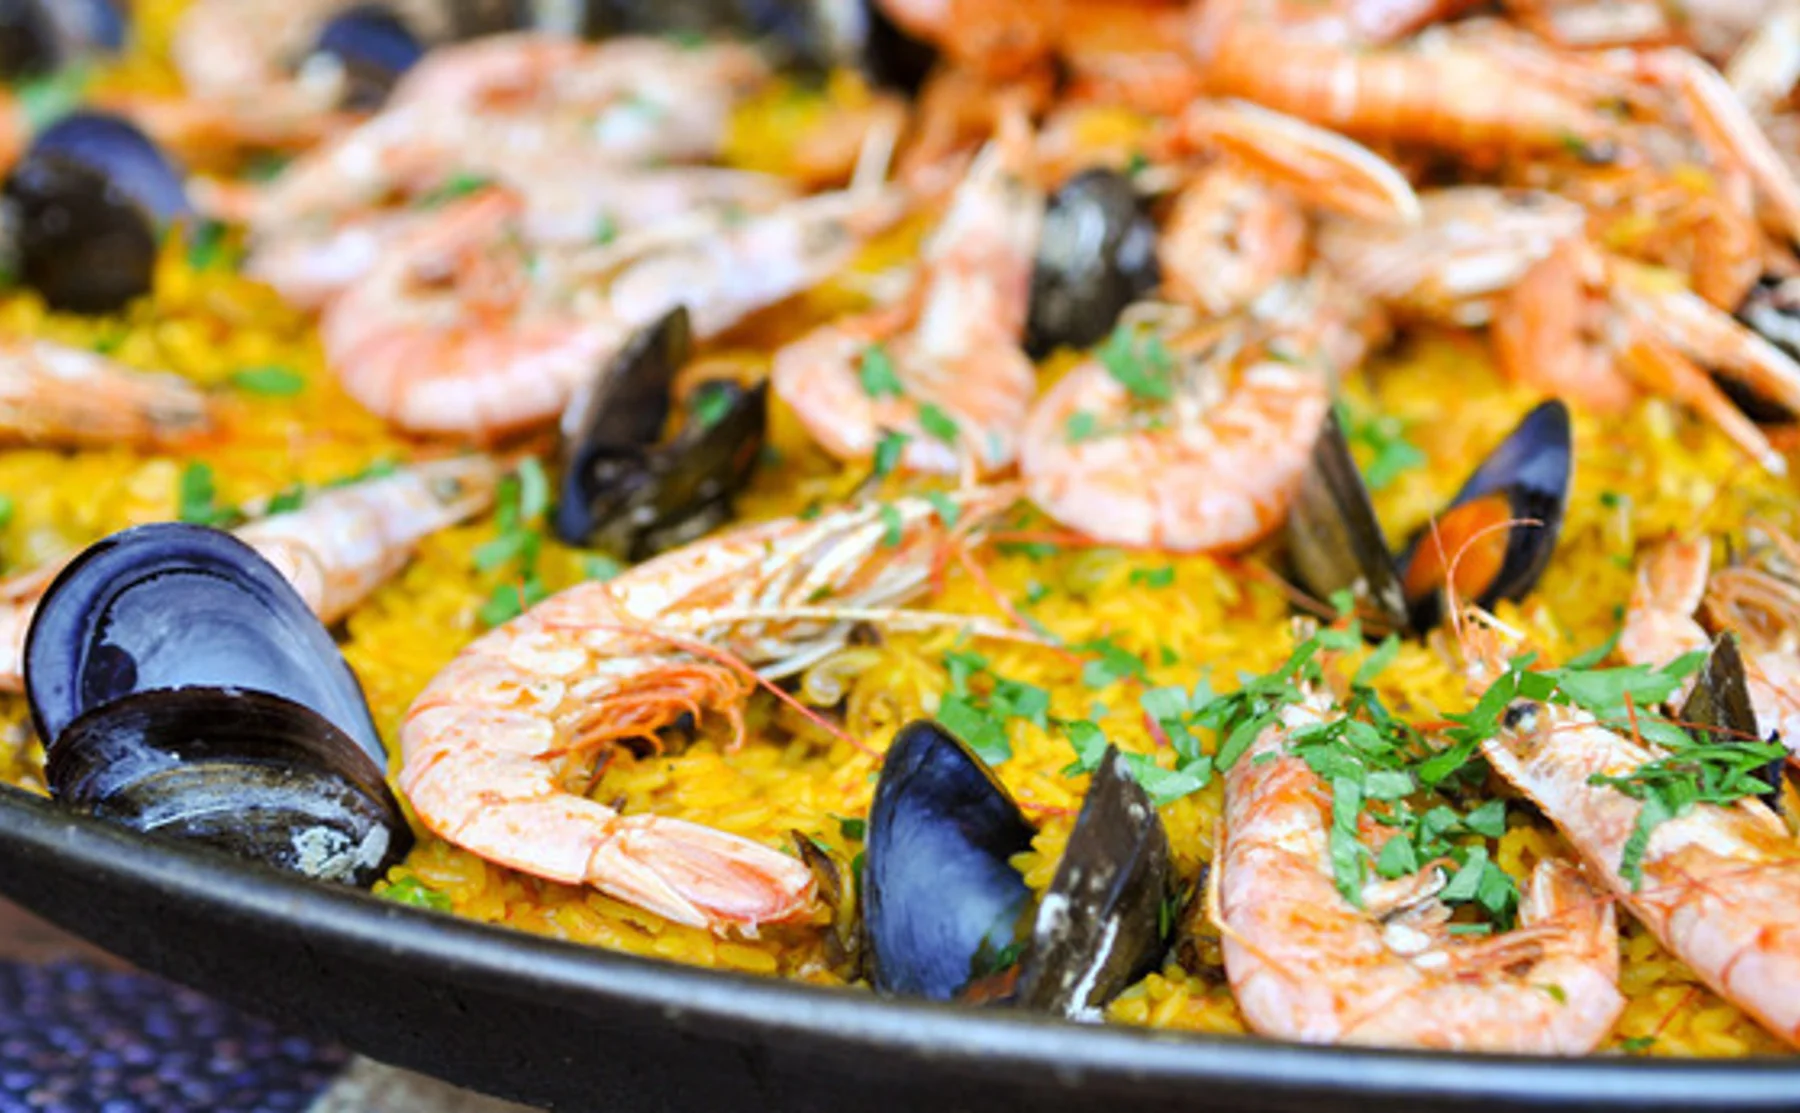 Spanish Paella cooking class and dinner in Haight Ashbury - 639848